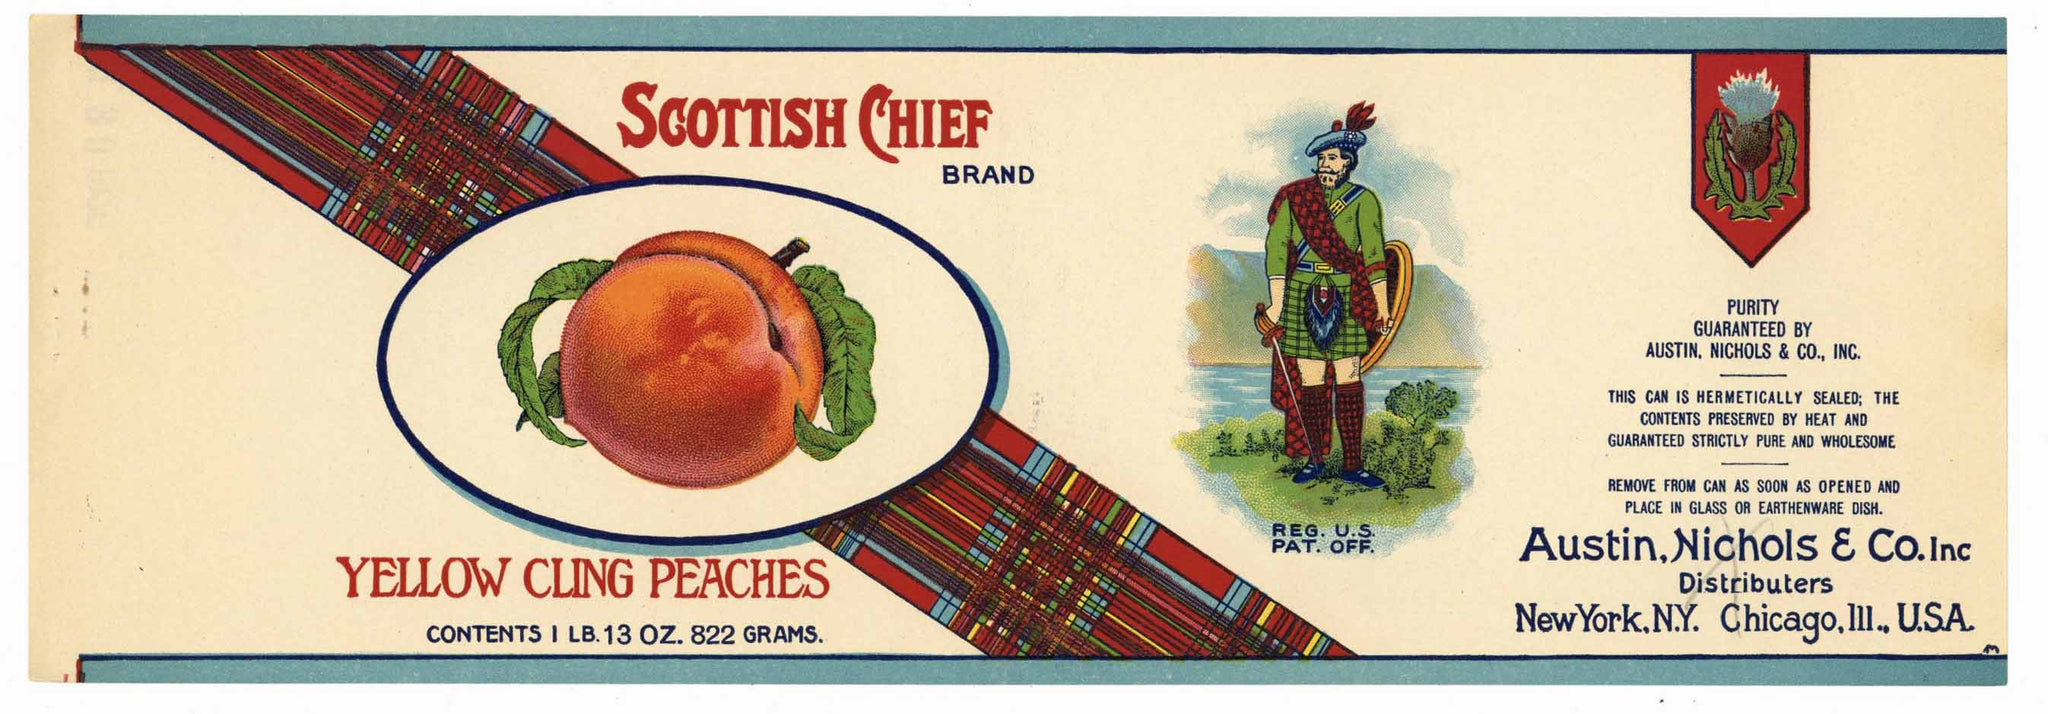 Scottish Chief Brand Vintage Cling Peach Can Label